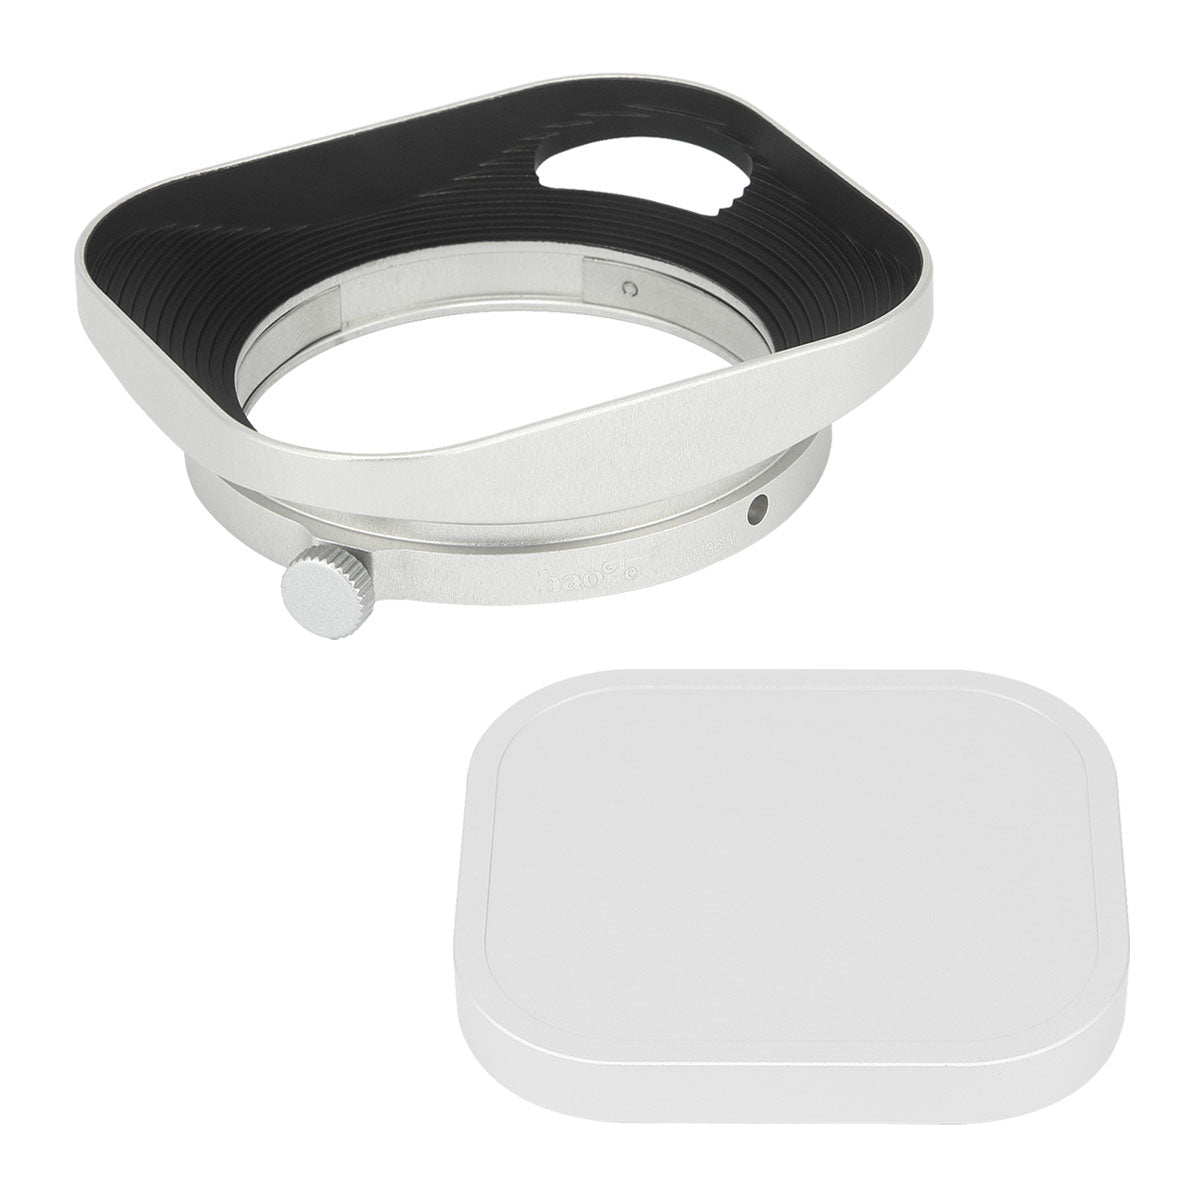 Haoge LH-M36W Square Metal Lens Hood Hollow Out Designed with Cap for Leica Summicron 35mm f2, Summicron M 35mm f2, Summicron-M 35mm f2 ASPH and Elmarit-M 28mm f2.8 ASPH Lens Silver